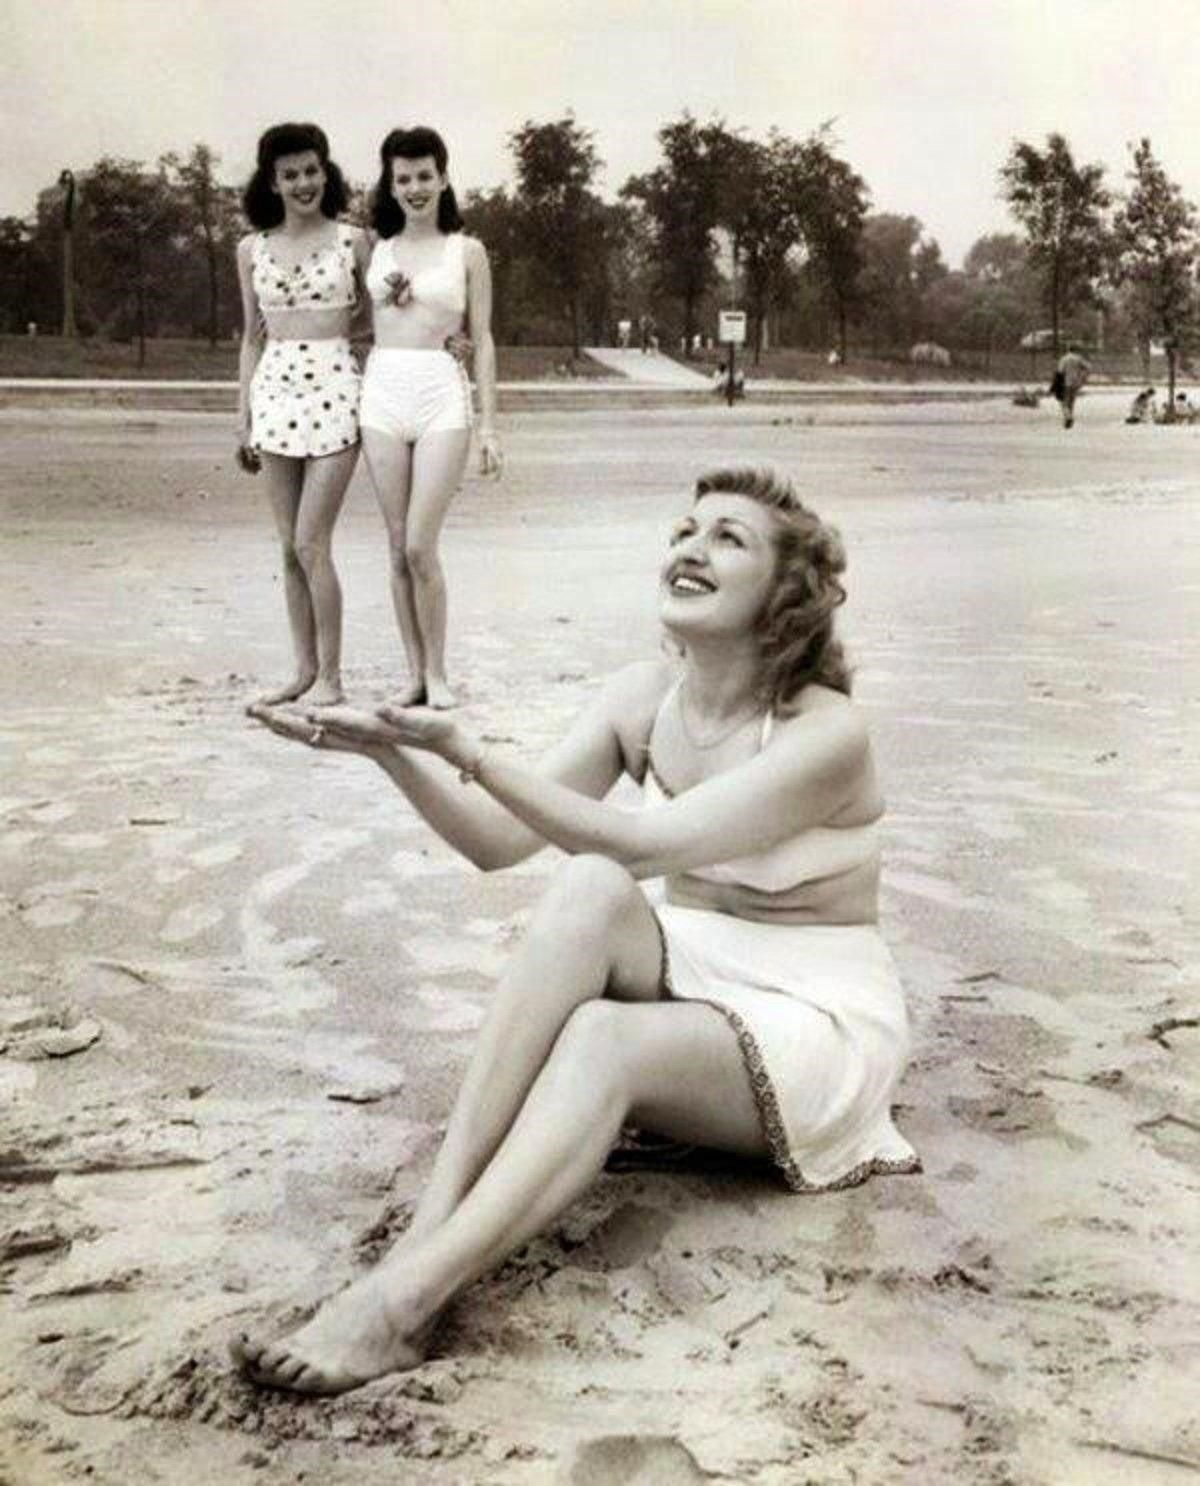 A woman on the beach discovers a race of tiny people, 1943